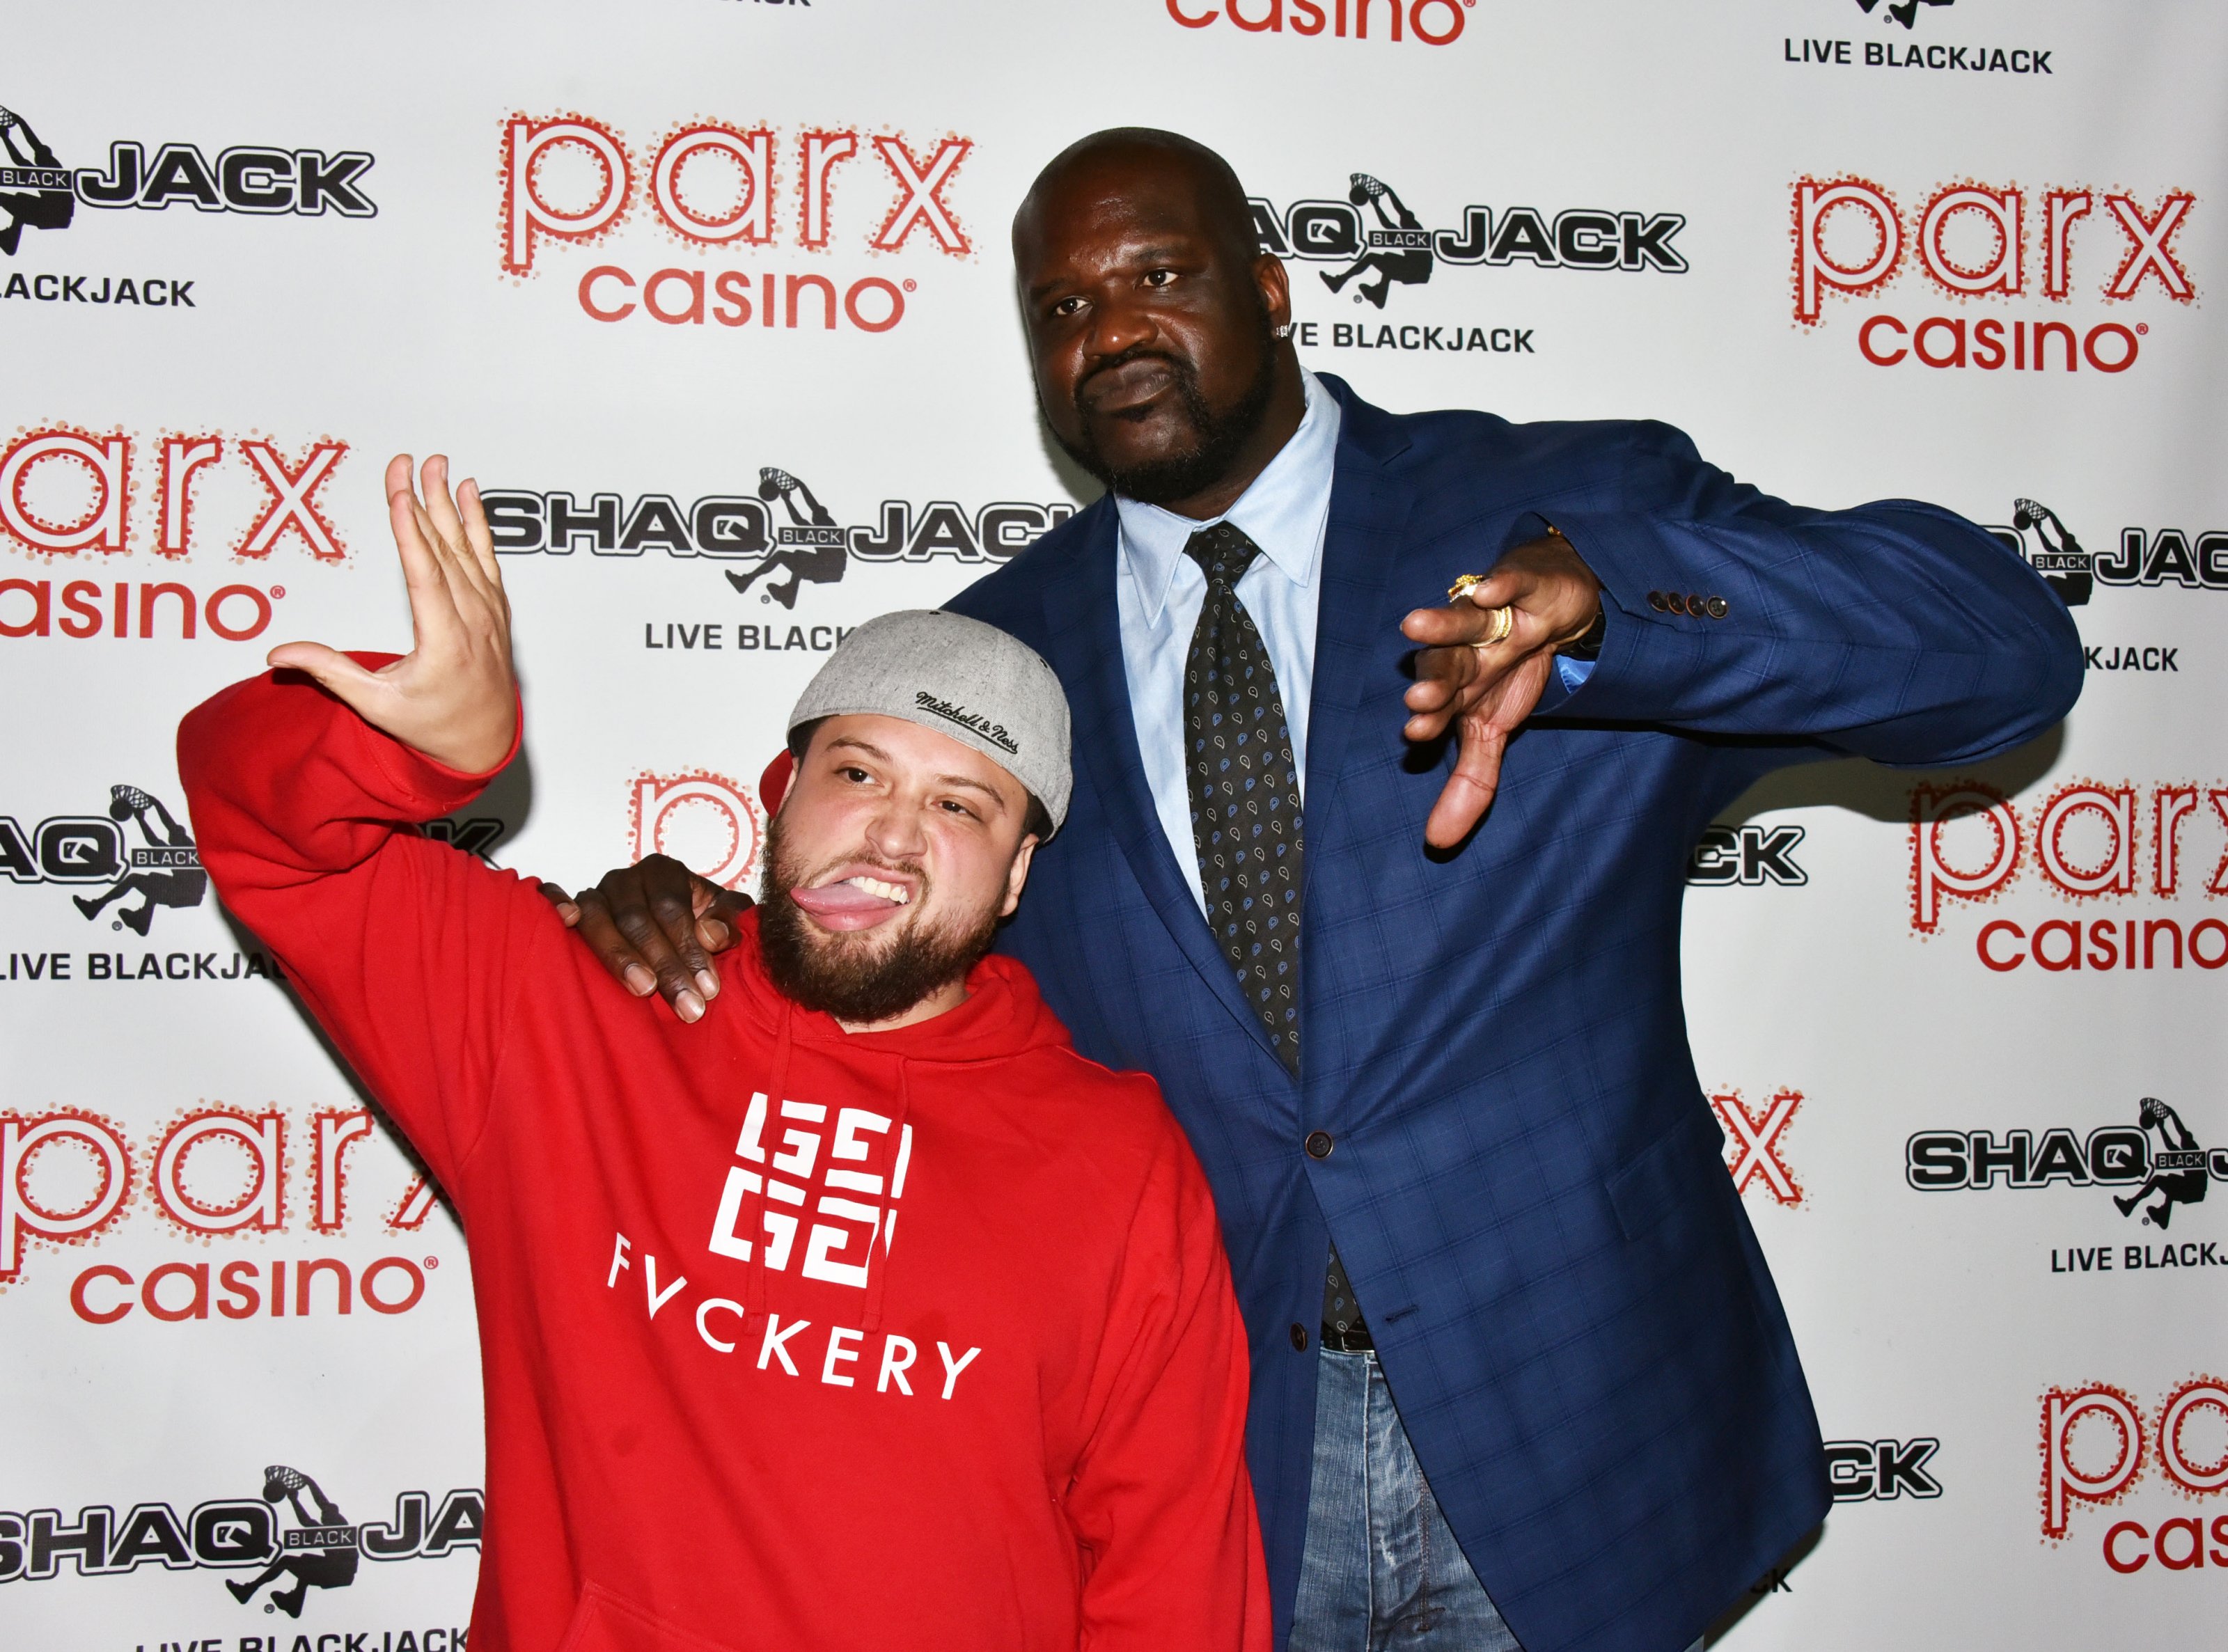 Shaquille O'Neal debuts ShaqBLACKJack at Parx Casino

Featuring: Shaquille O'Neal
Where: Bensalem, Pennsylvania, United States
When: 05 Oct 2015
Credit: Hugh Dillon/WENN.com